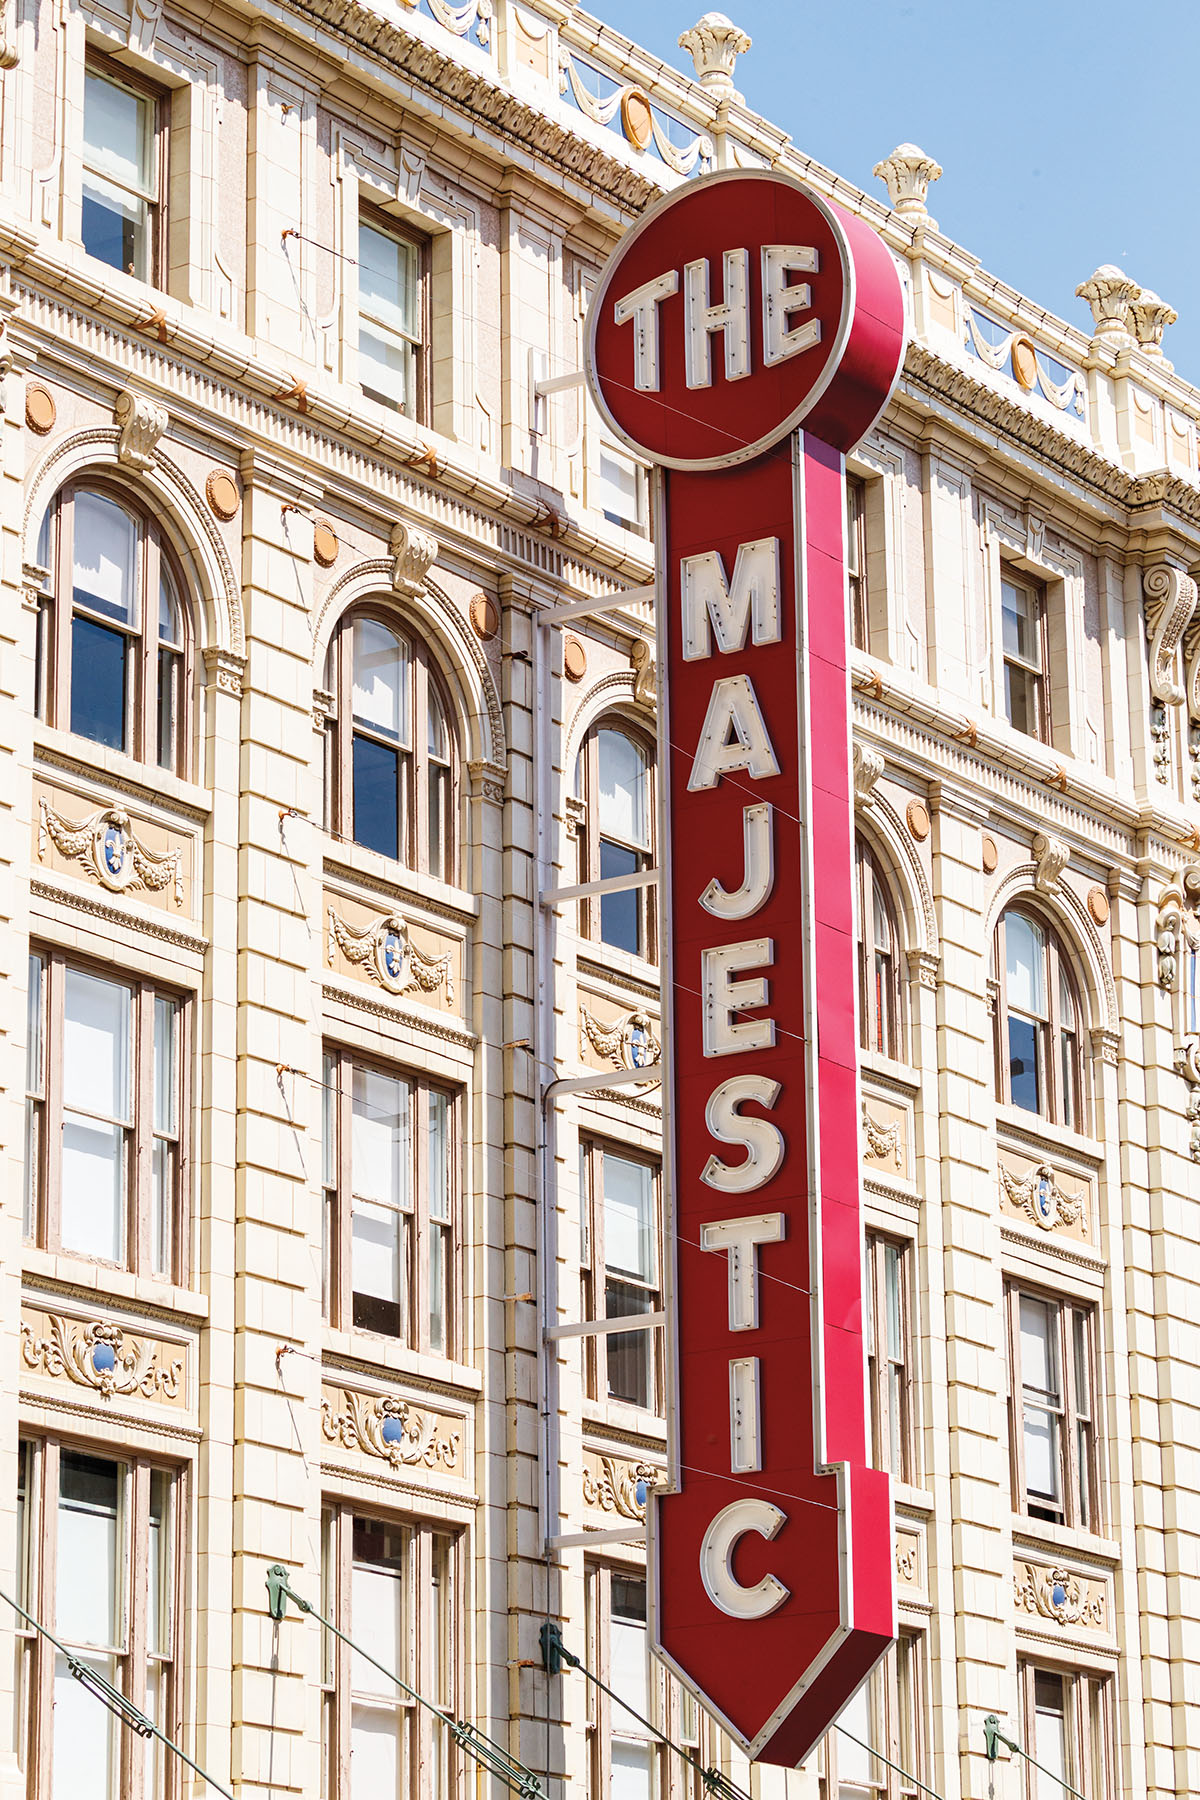 The outside of a theater with a red sign reading "The Magestic"